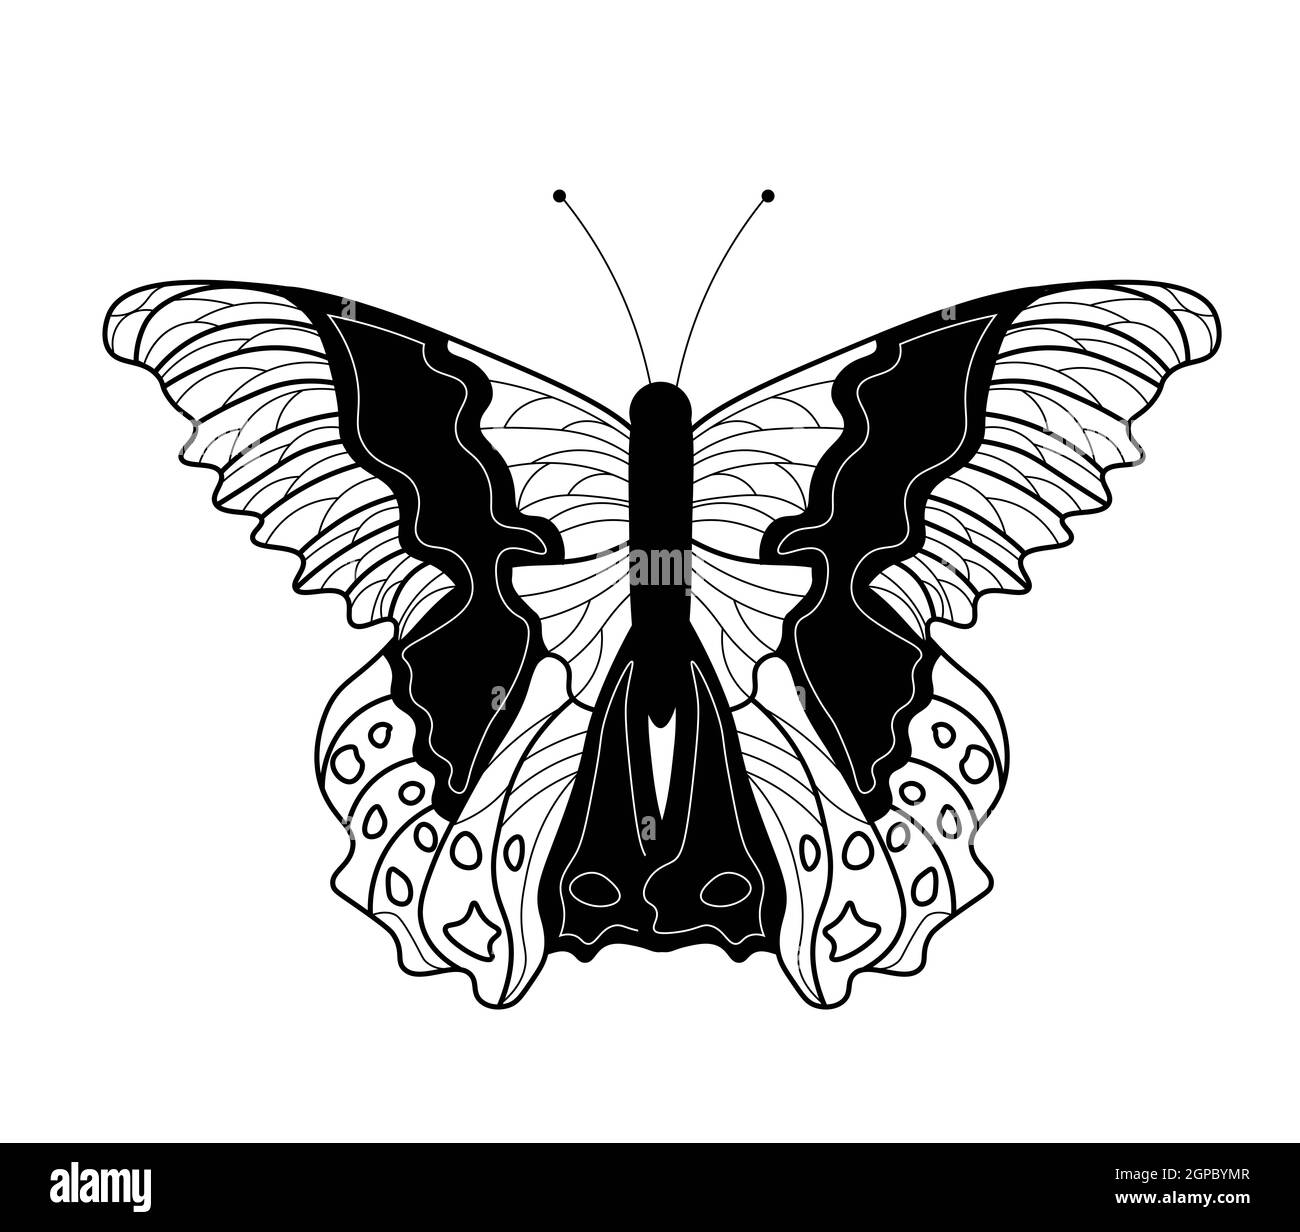 Butterfly coloring book. Linear drawing of a butterfly. Stock Photo